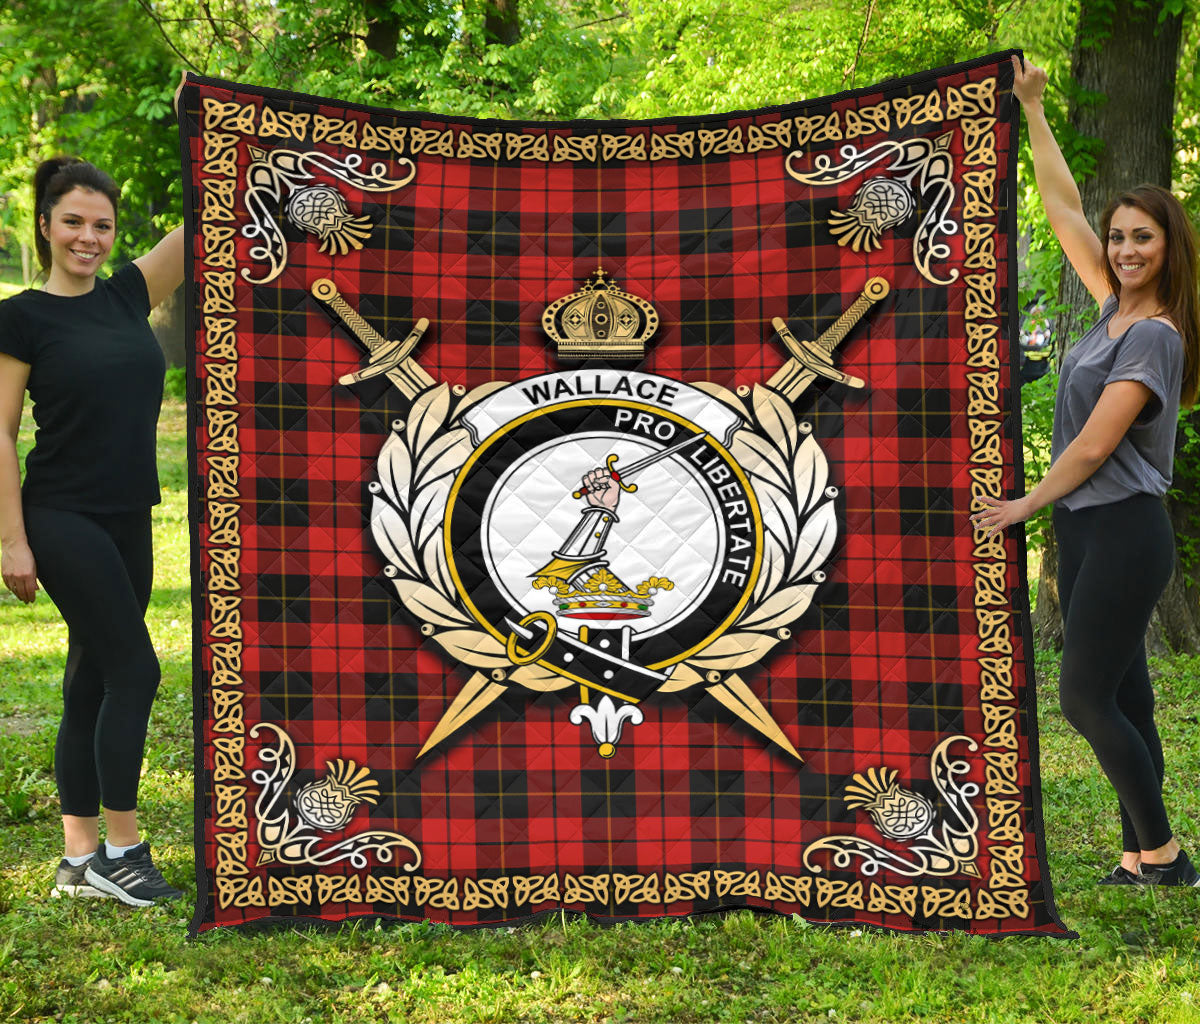 Wallace Weathered Tartan Crest Premium Quilt - Celtic Thistle Style